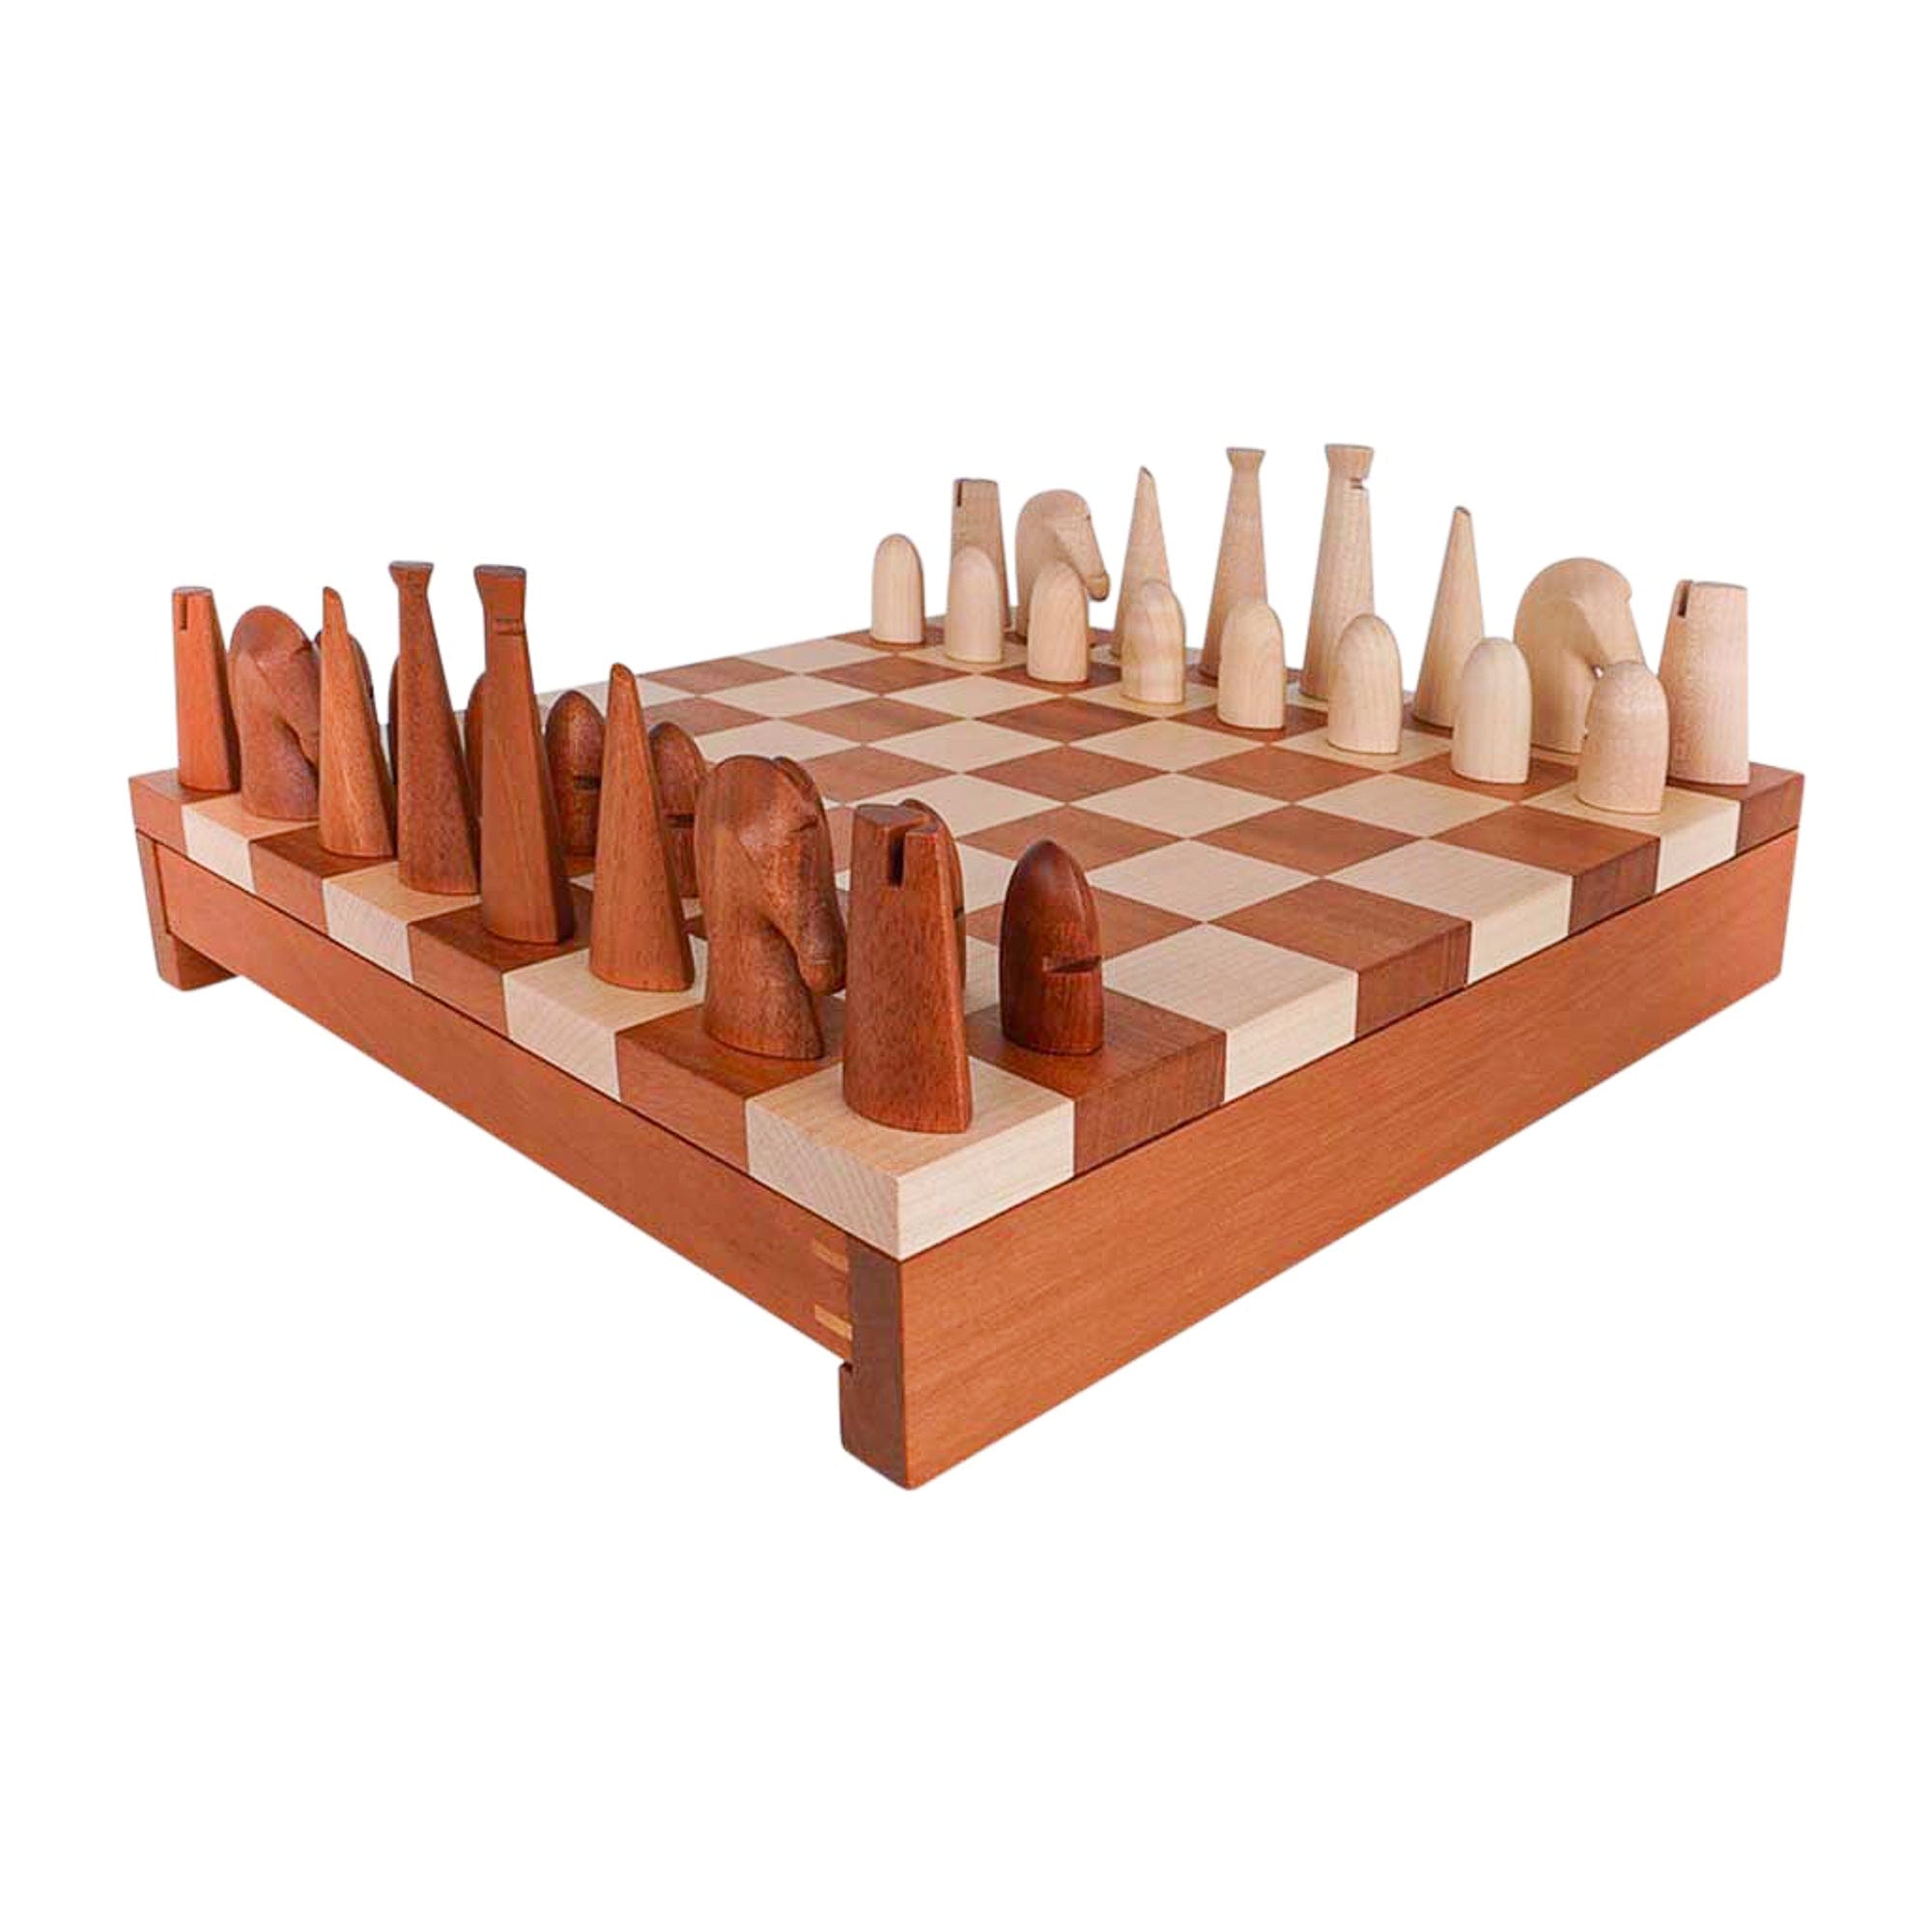 Saint-Louis Chess Game Jeu Flannel-Grey / Clear Crystal and Wood